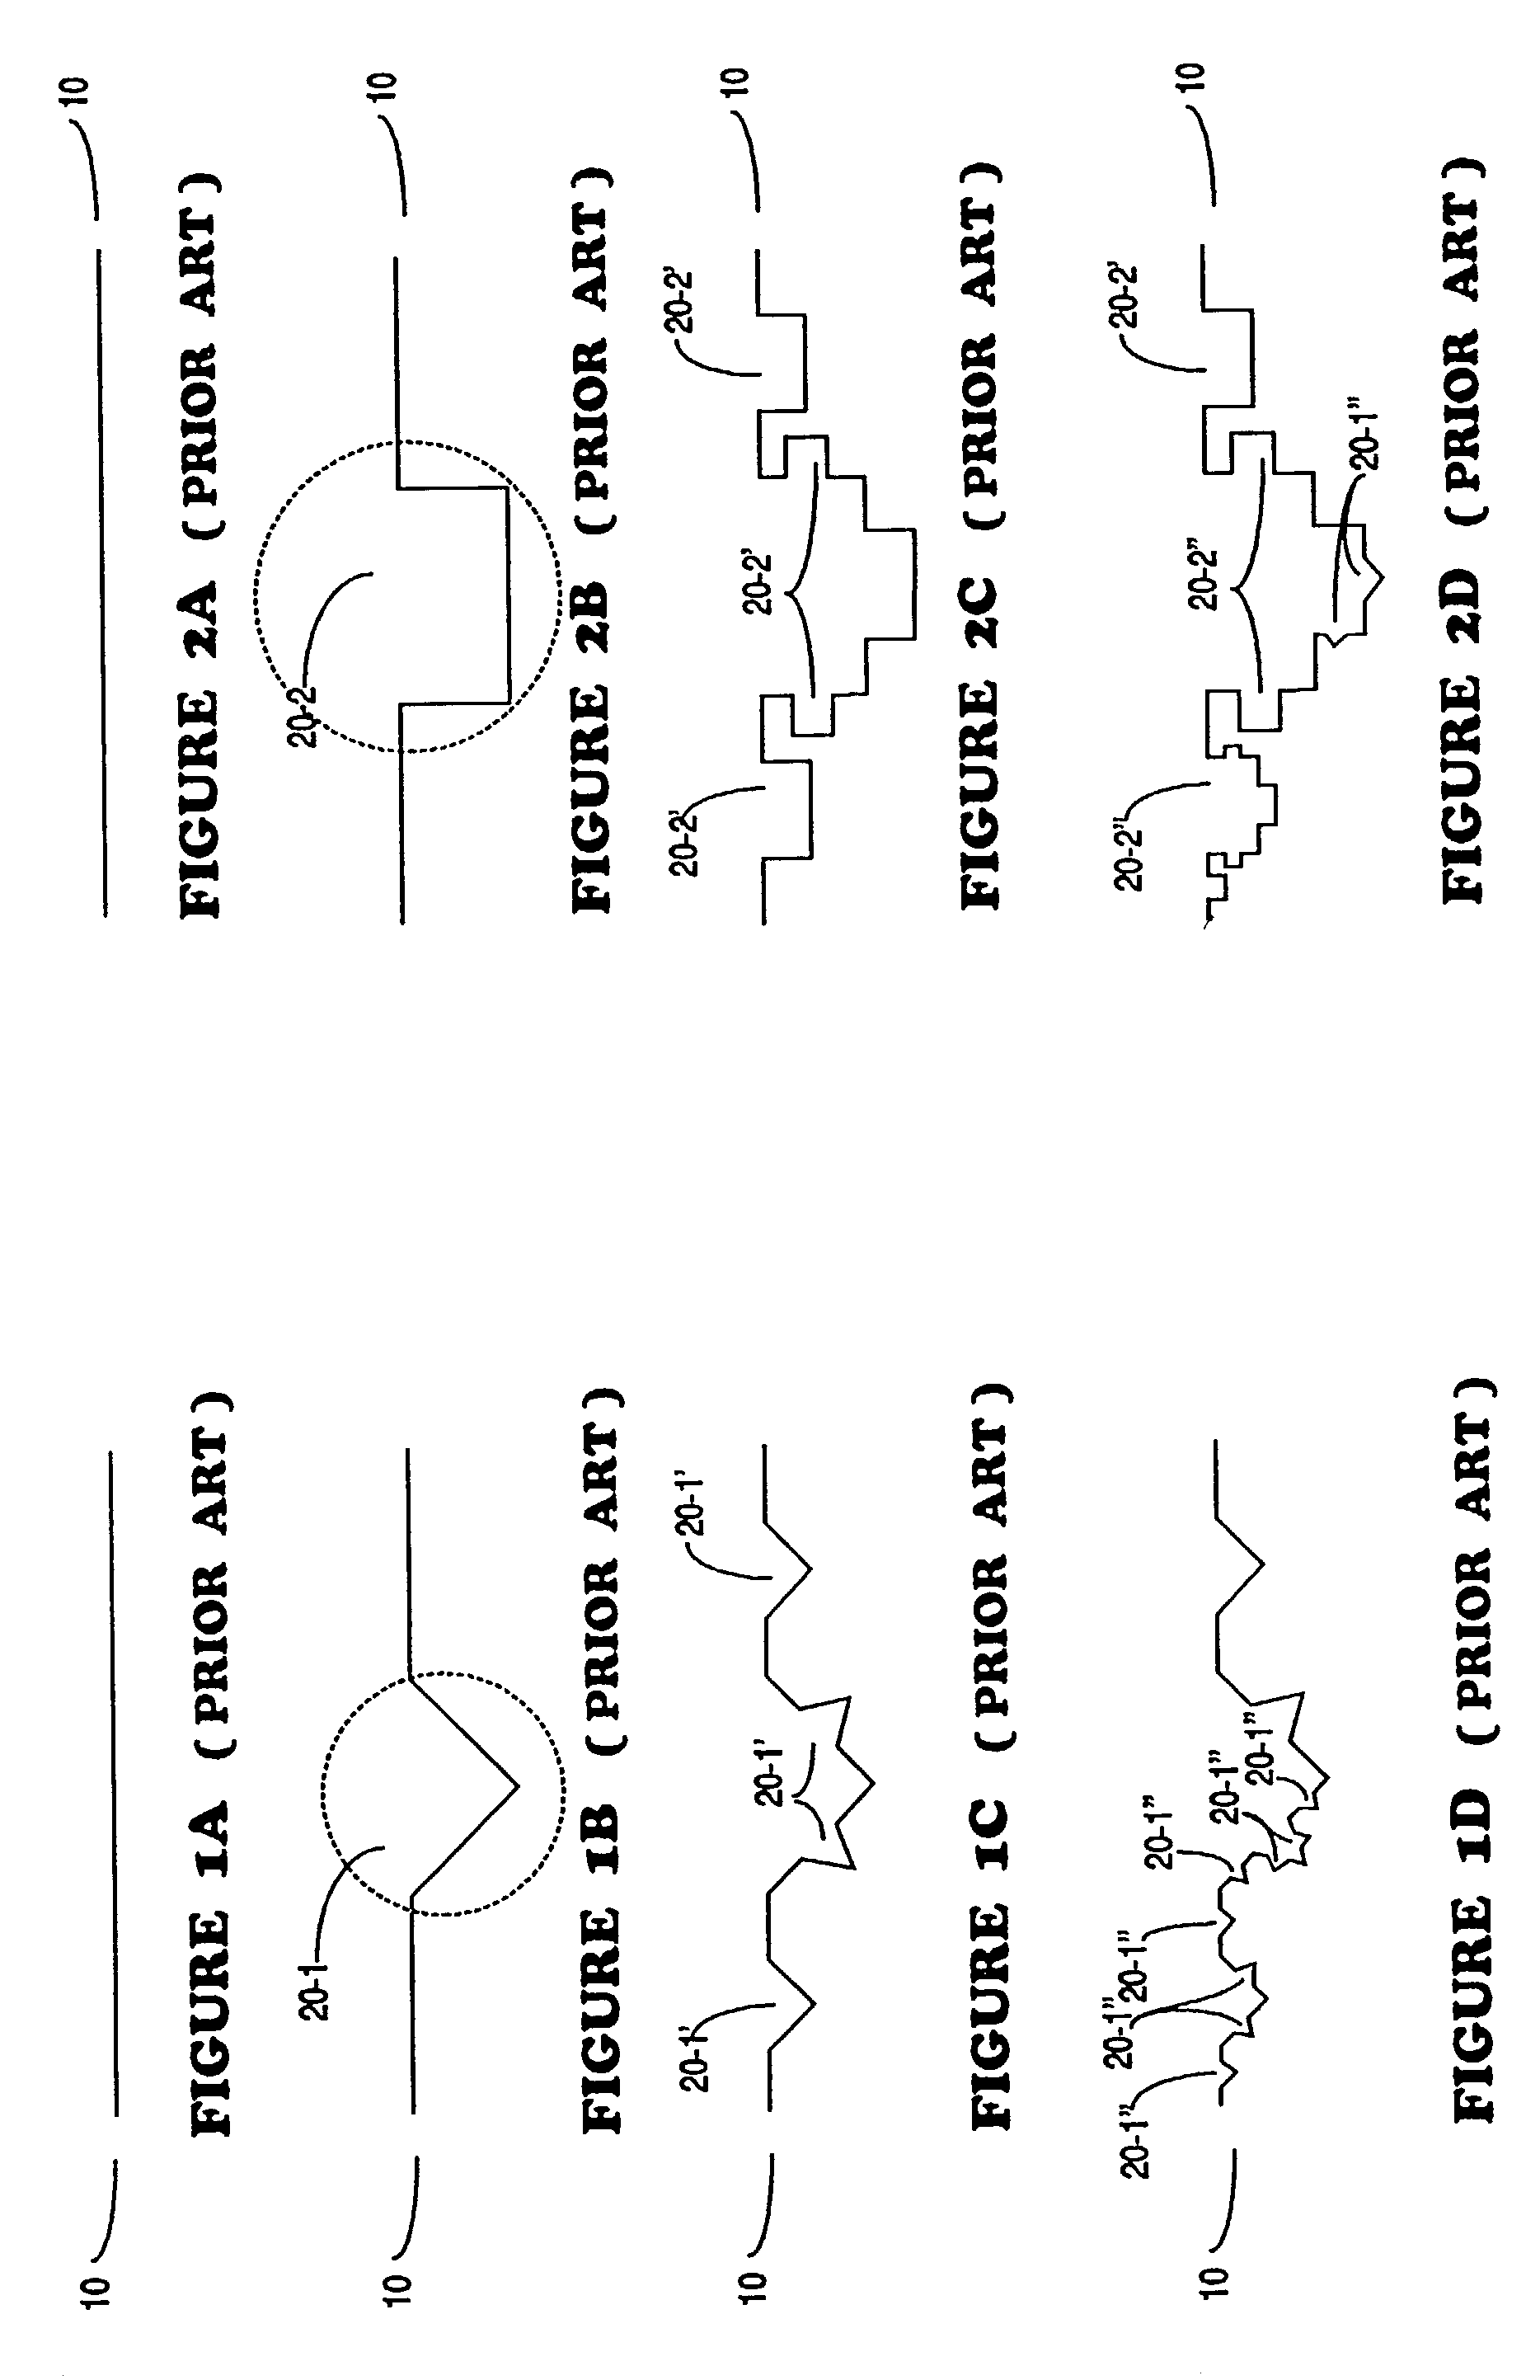 Fractal antenna ground counterpoise, ground planes, and loading elements and microstrip patch antennas with fractal structure